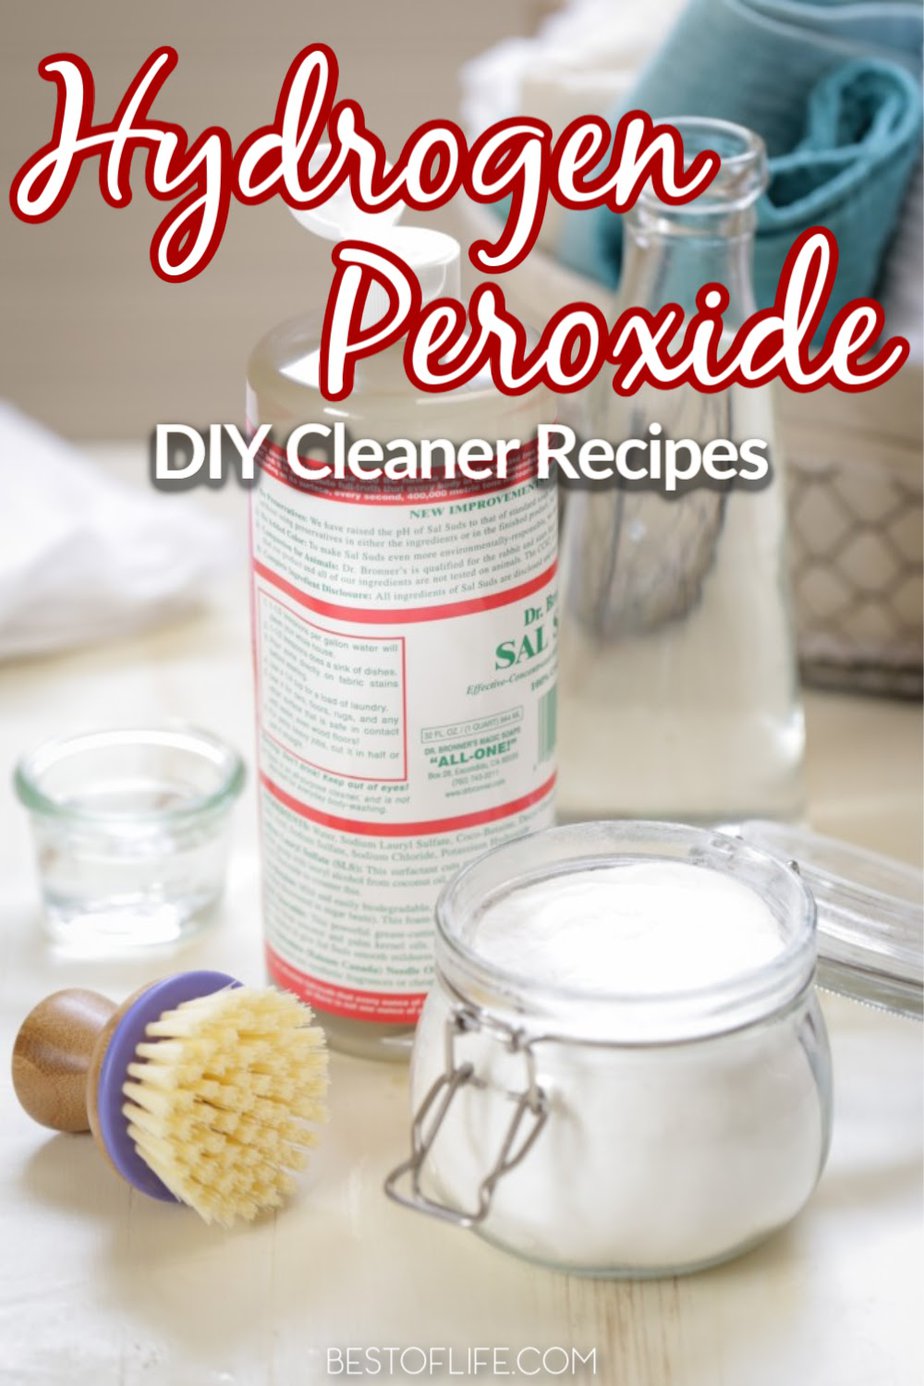 25+ Hydrogen Peroxide Cleaner DIY Recipes : The Best of Life